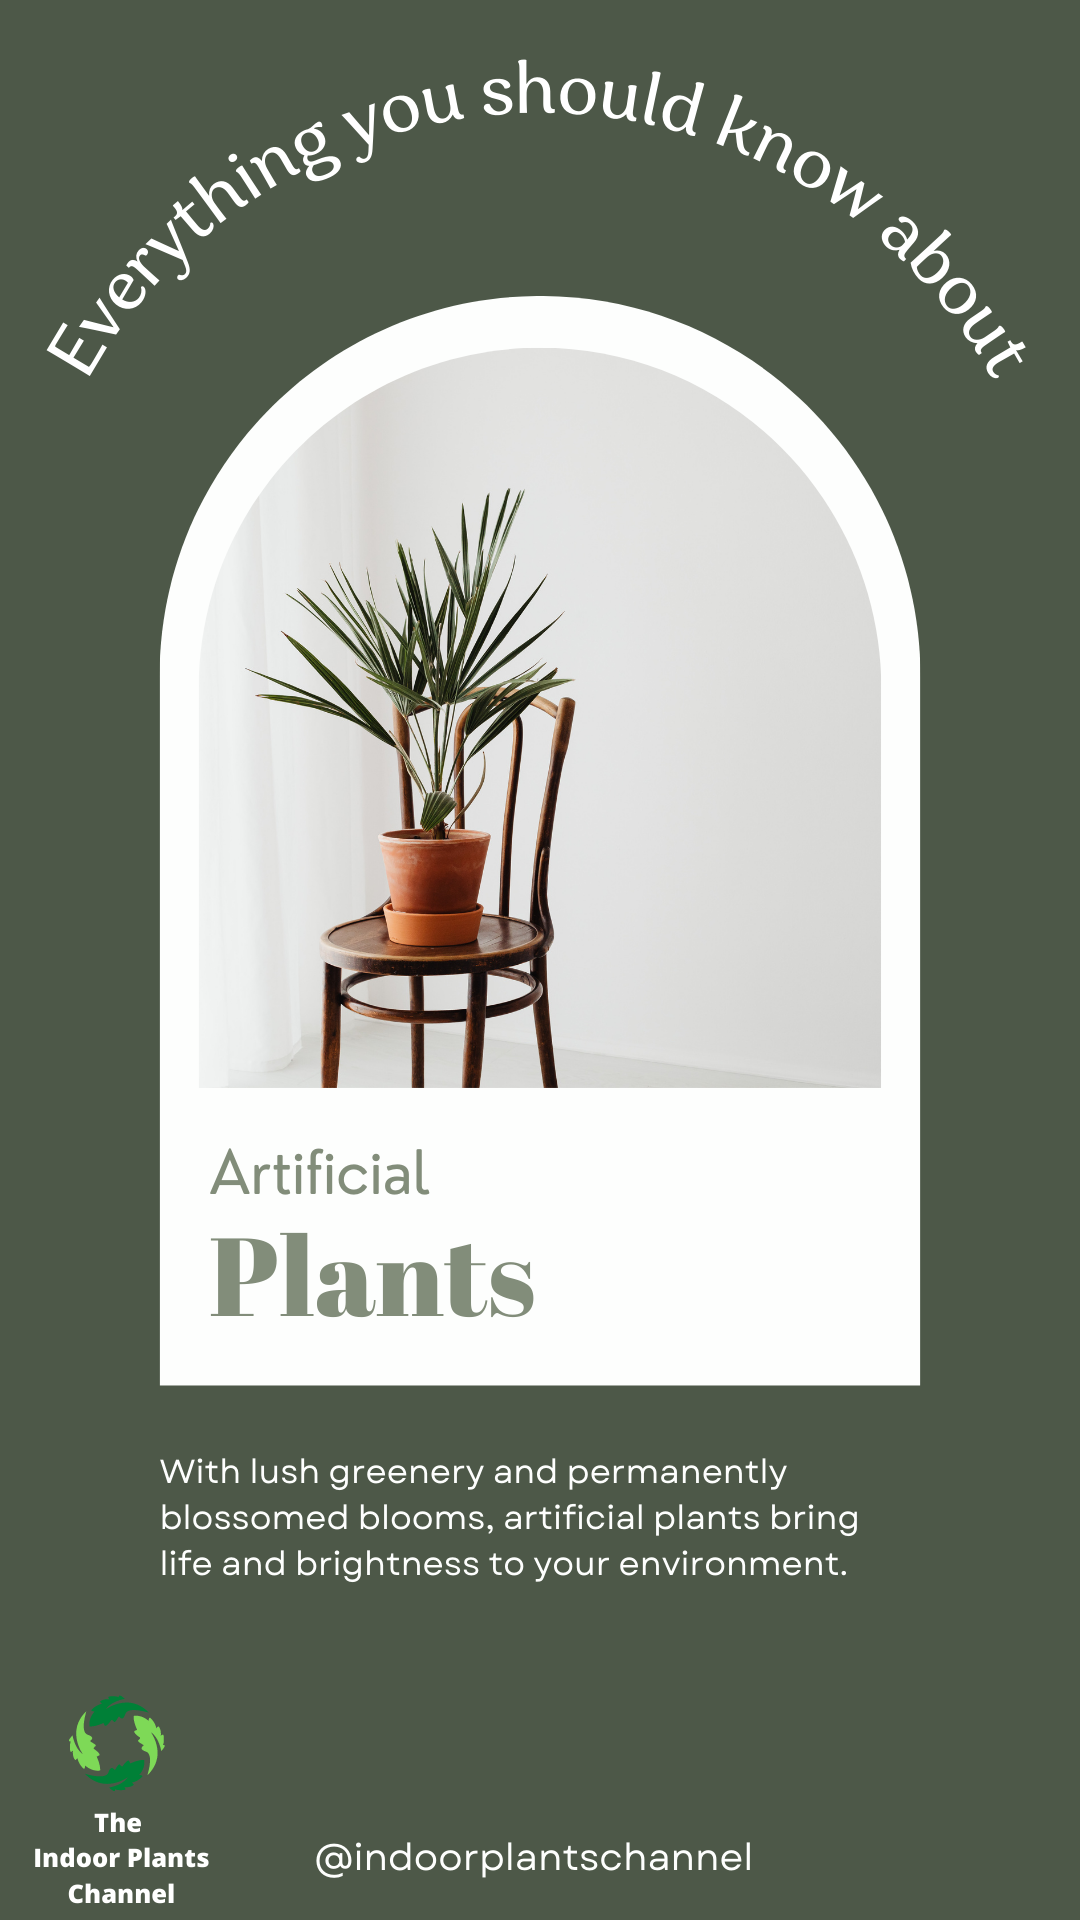 9 Common Misconceptions About Artificial Plants